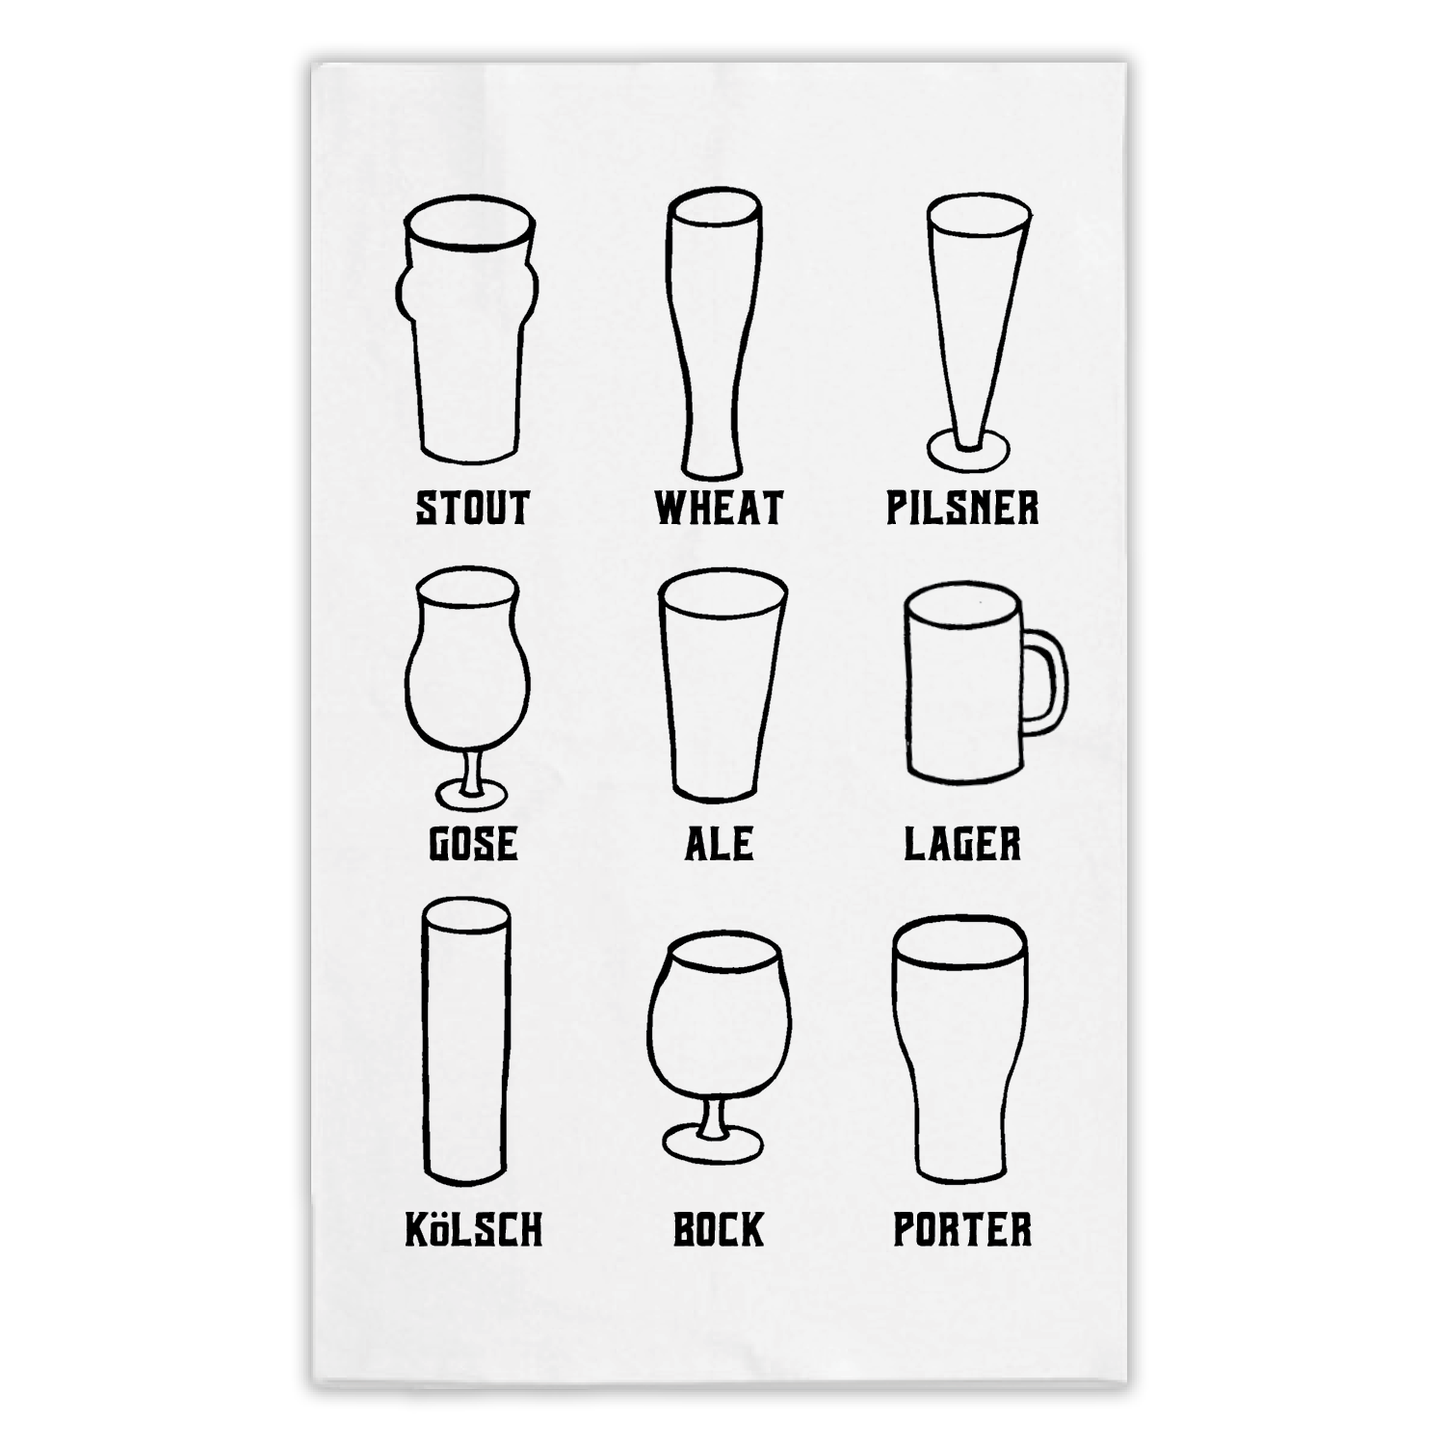 Assortment of hand drawn beer glasses on a white kitchen dish towel